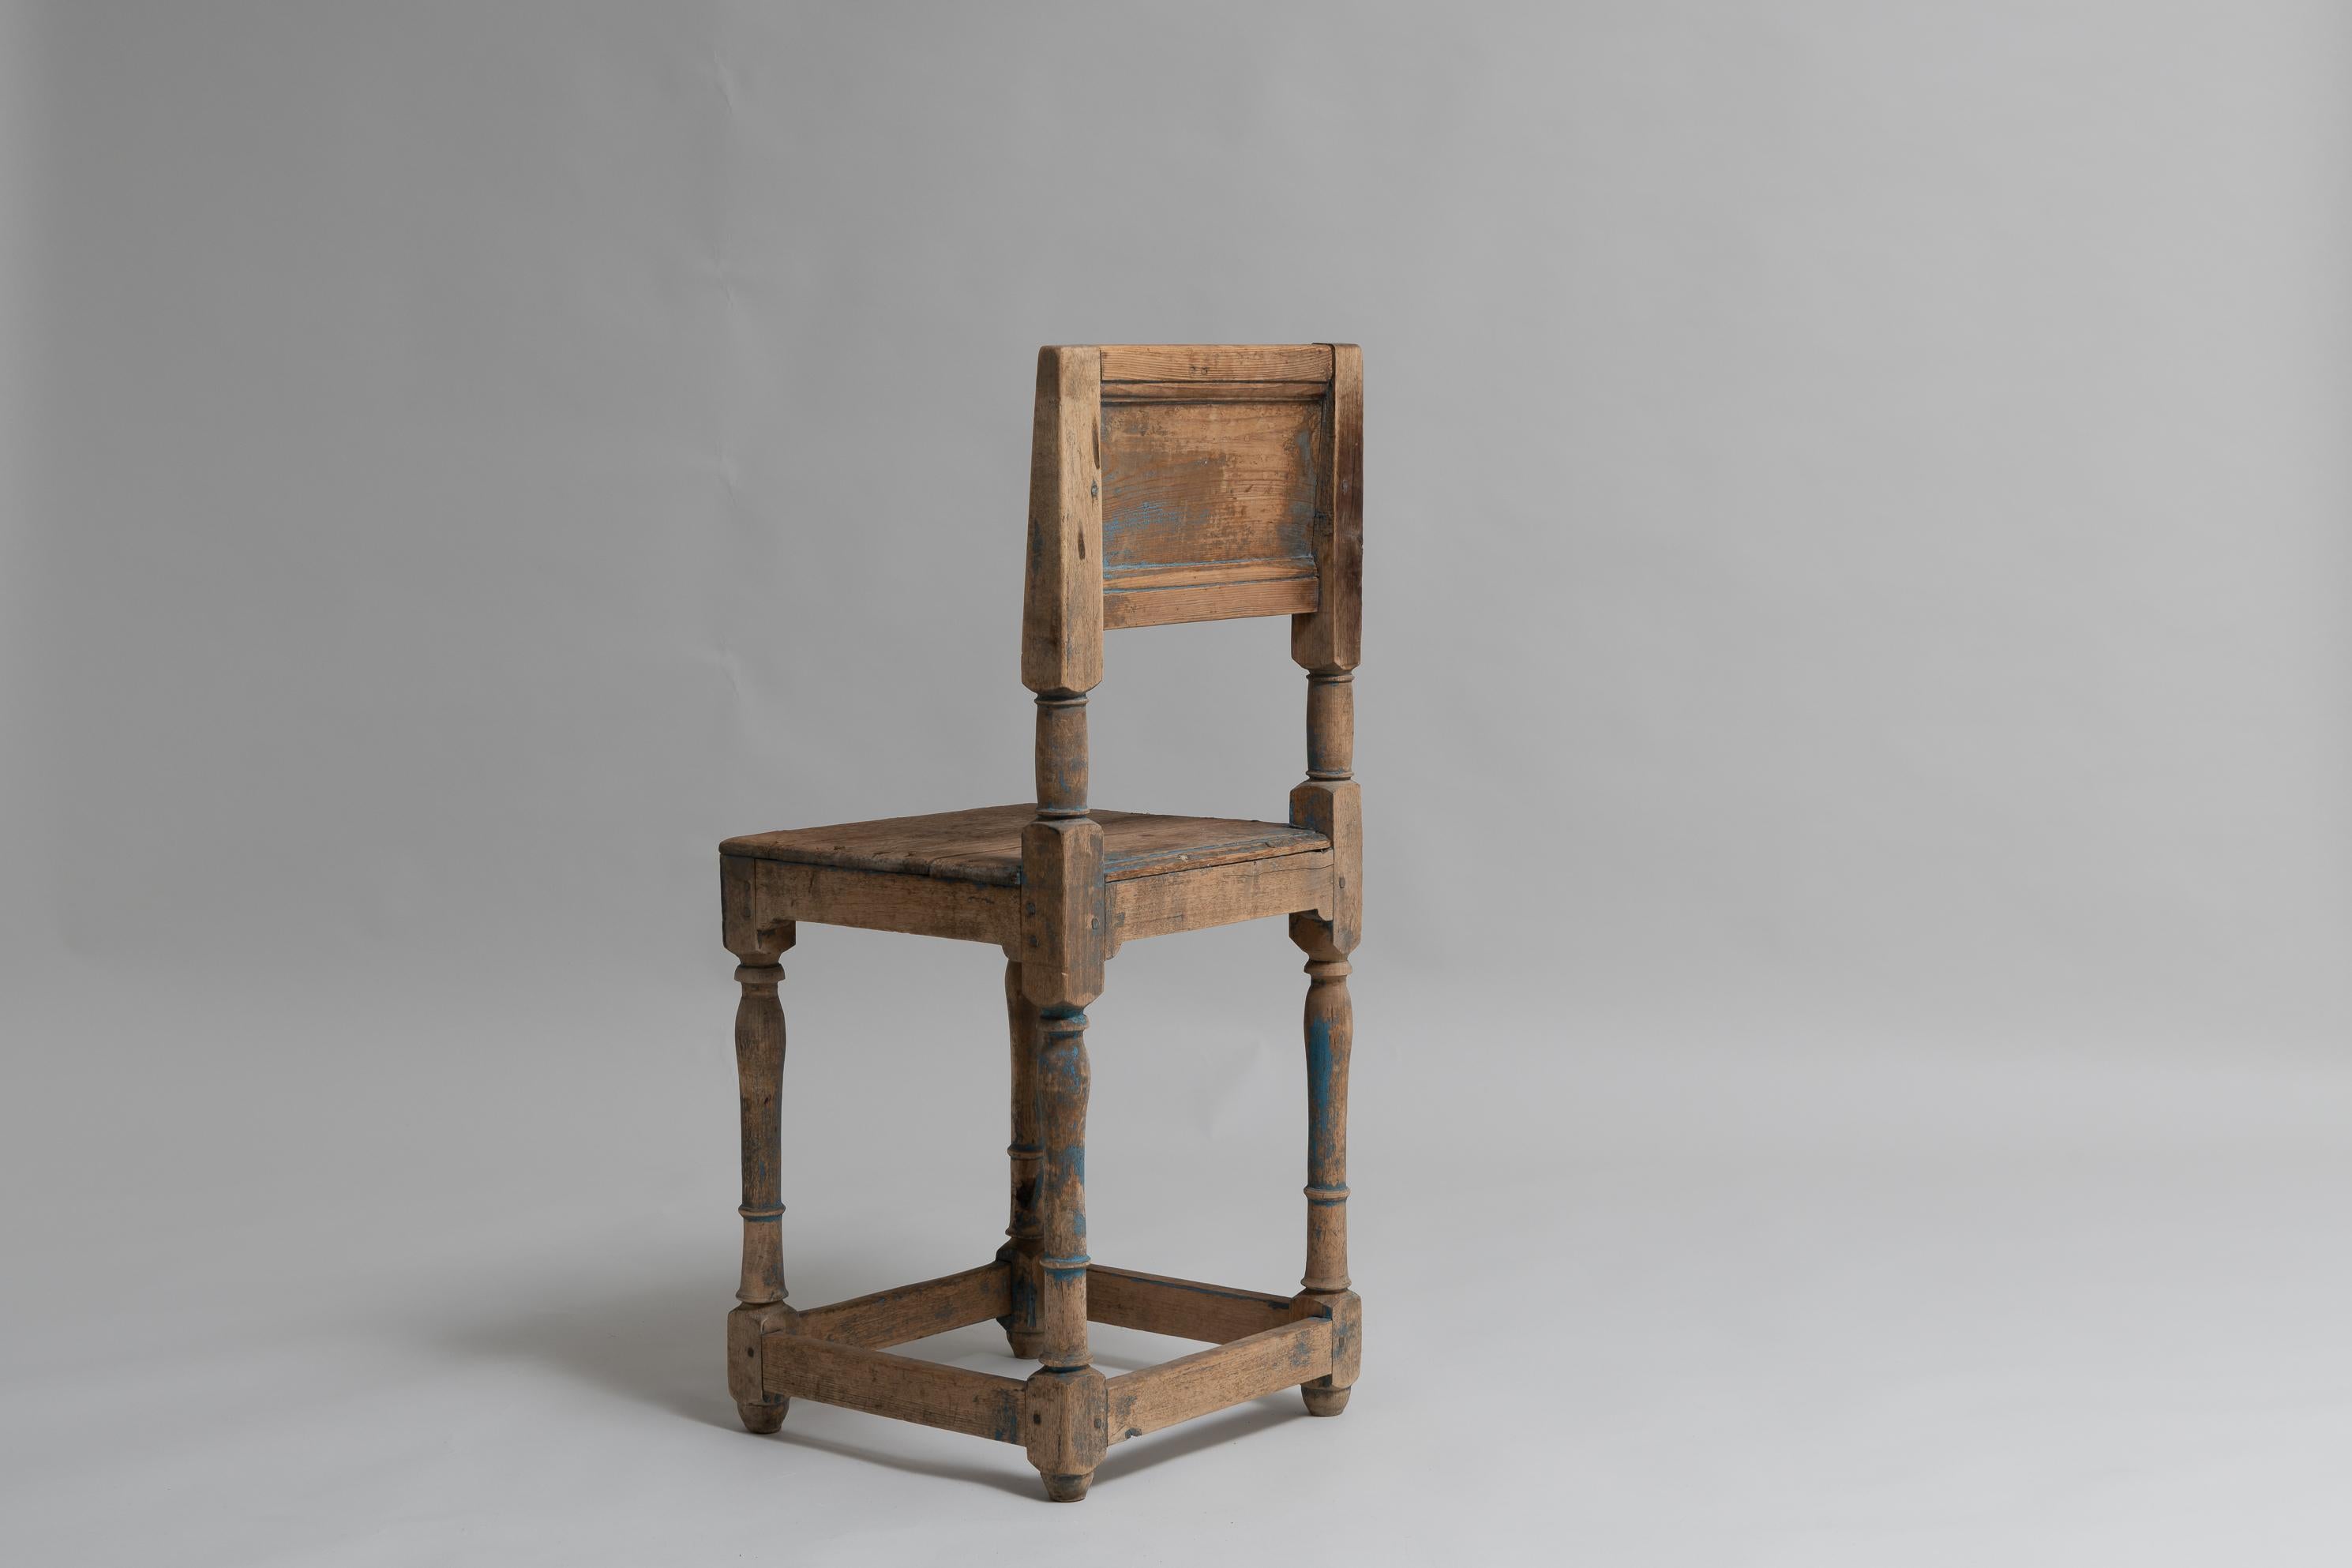 Pine 19th Century Swedish Country Renaissance Revival Chair